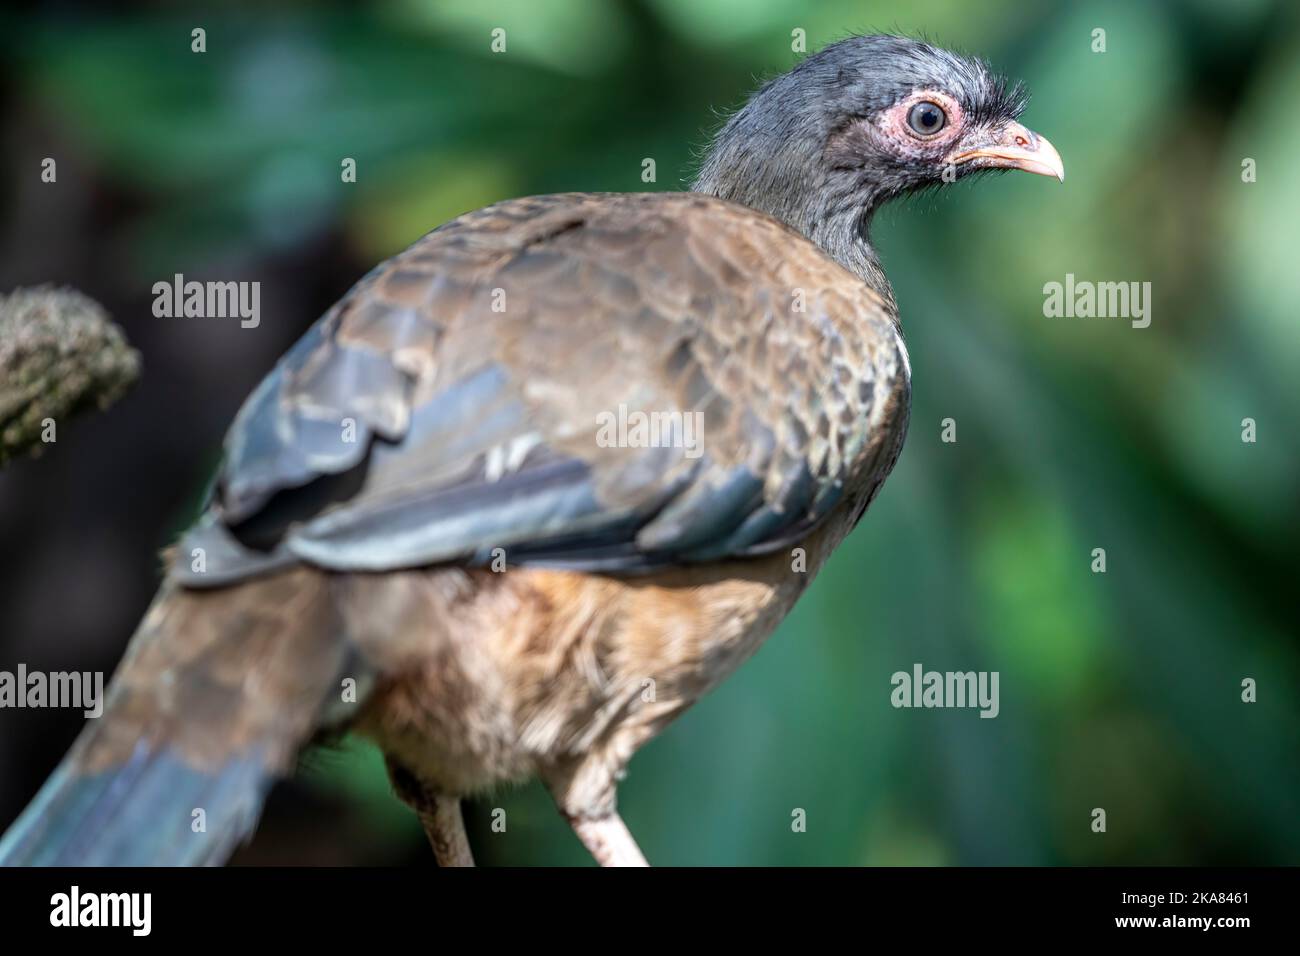 The Chaco chachalaca (Ortalis canicollis) is a species of bird in the family Cracidae.  Its natural habitats are subtropical or tropical dry forest Stock Photo